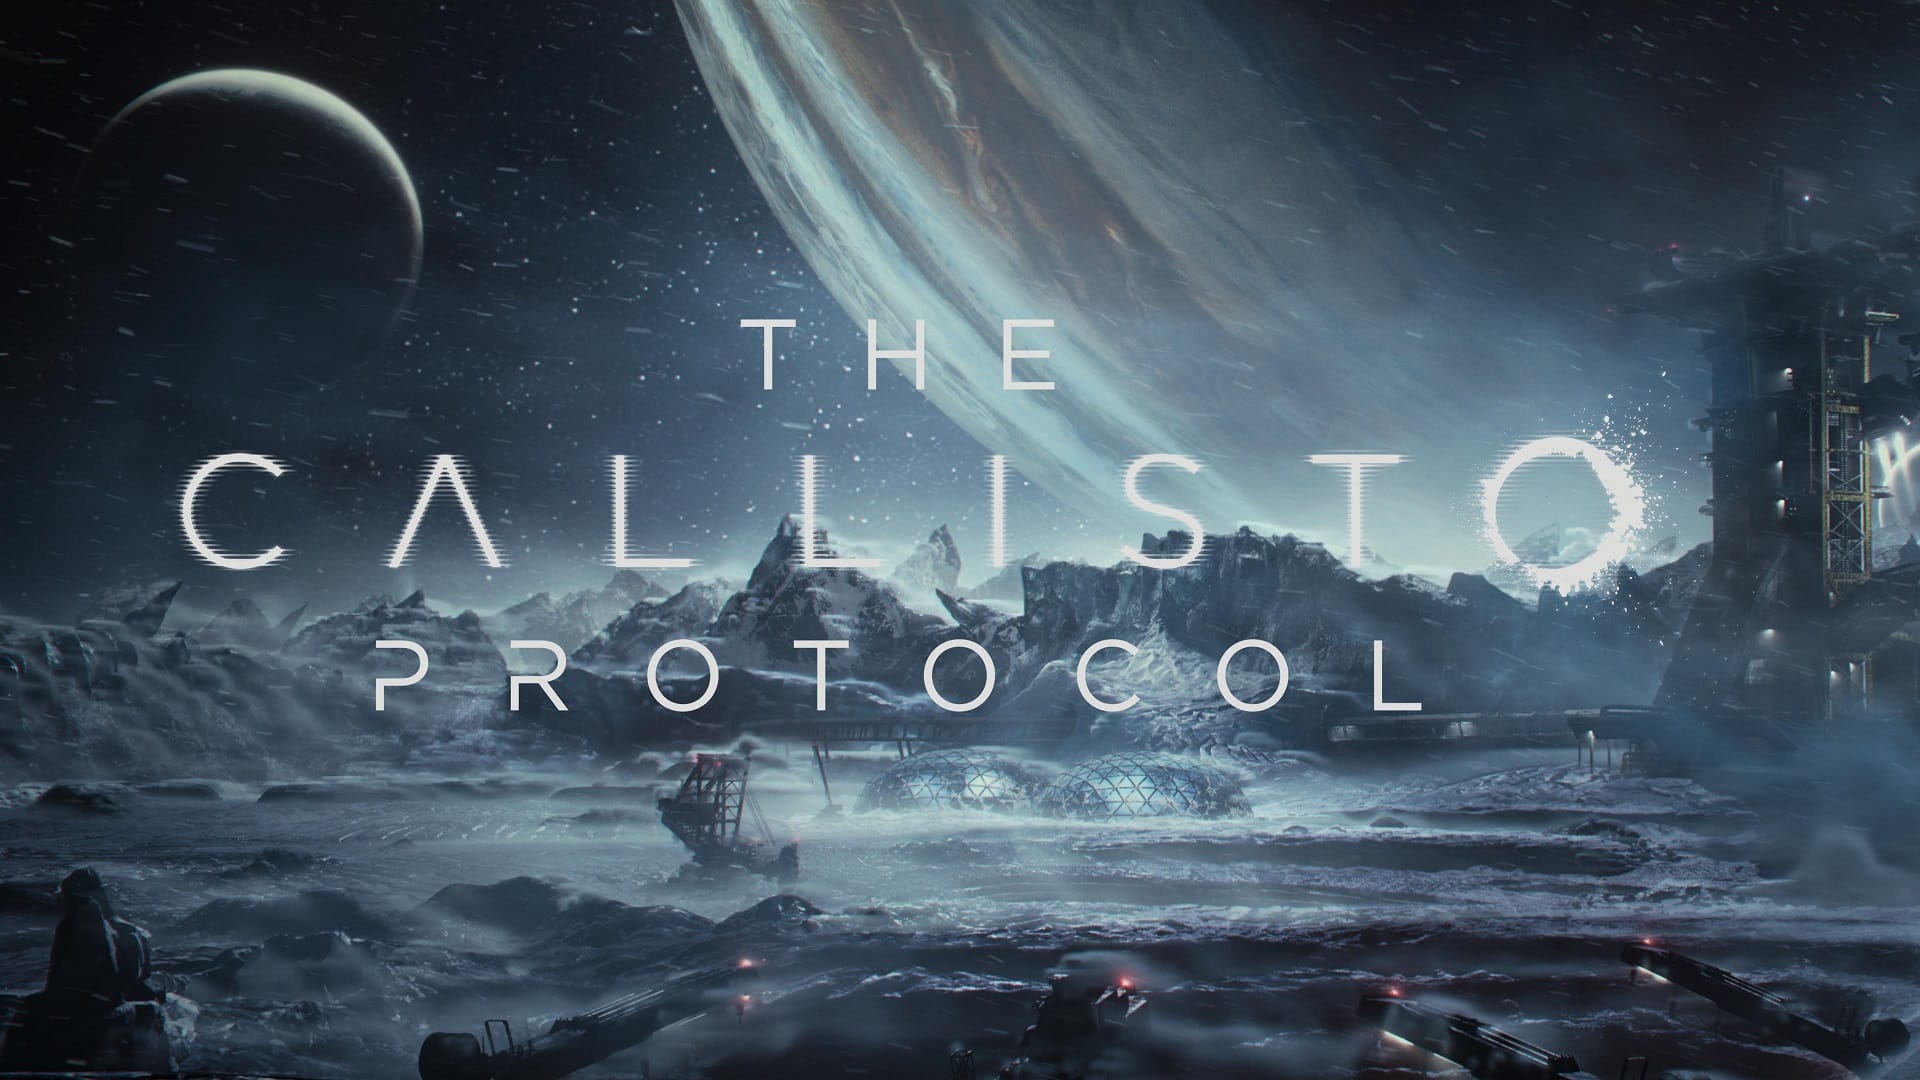 The Callisto Protocol Review SPOILER FREE - Exactly What You